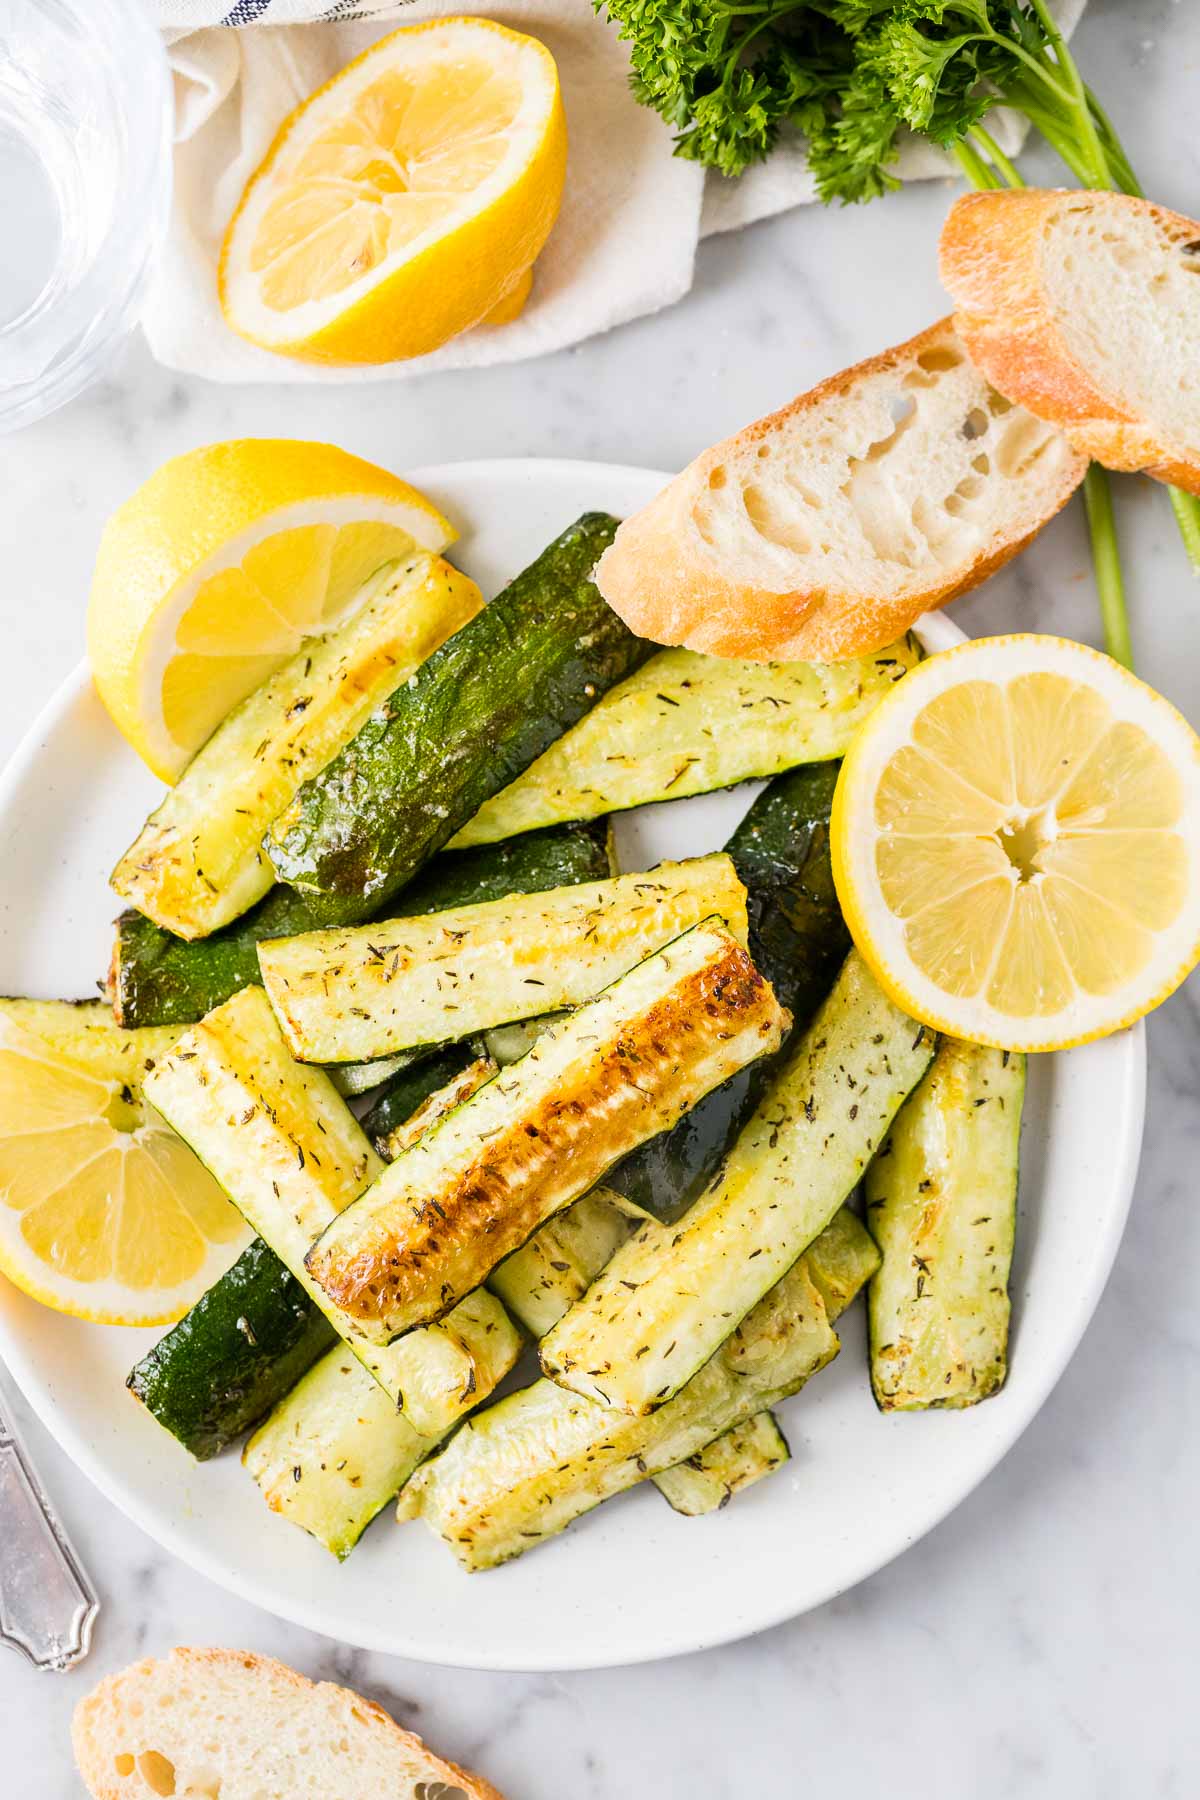 Roasted Zucchini on a white plate garnished with lemon slices